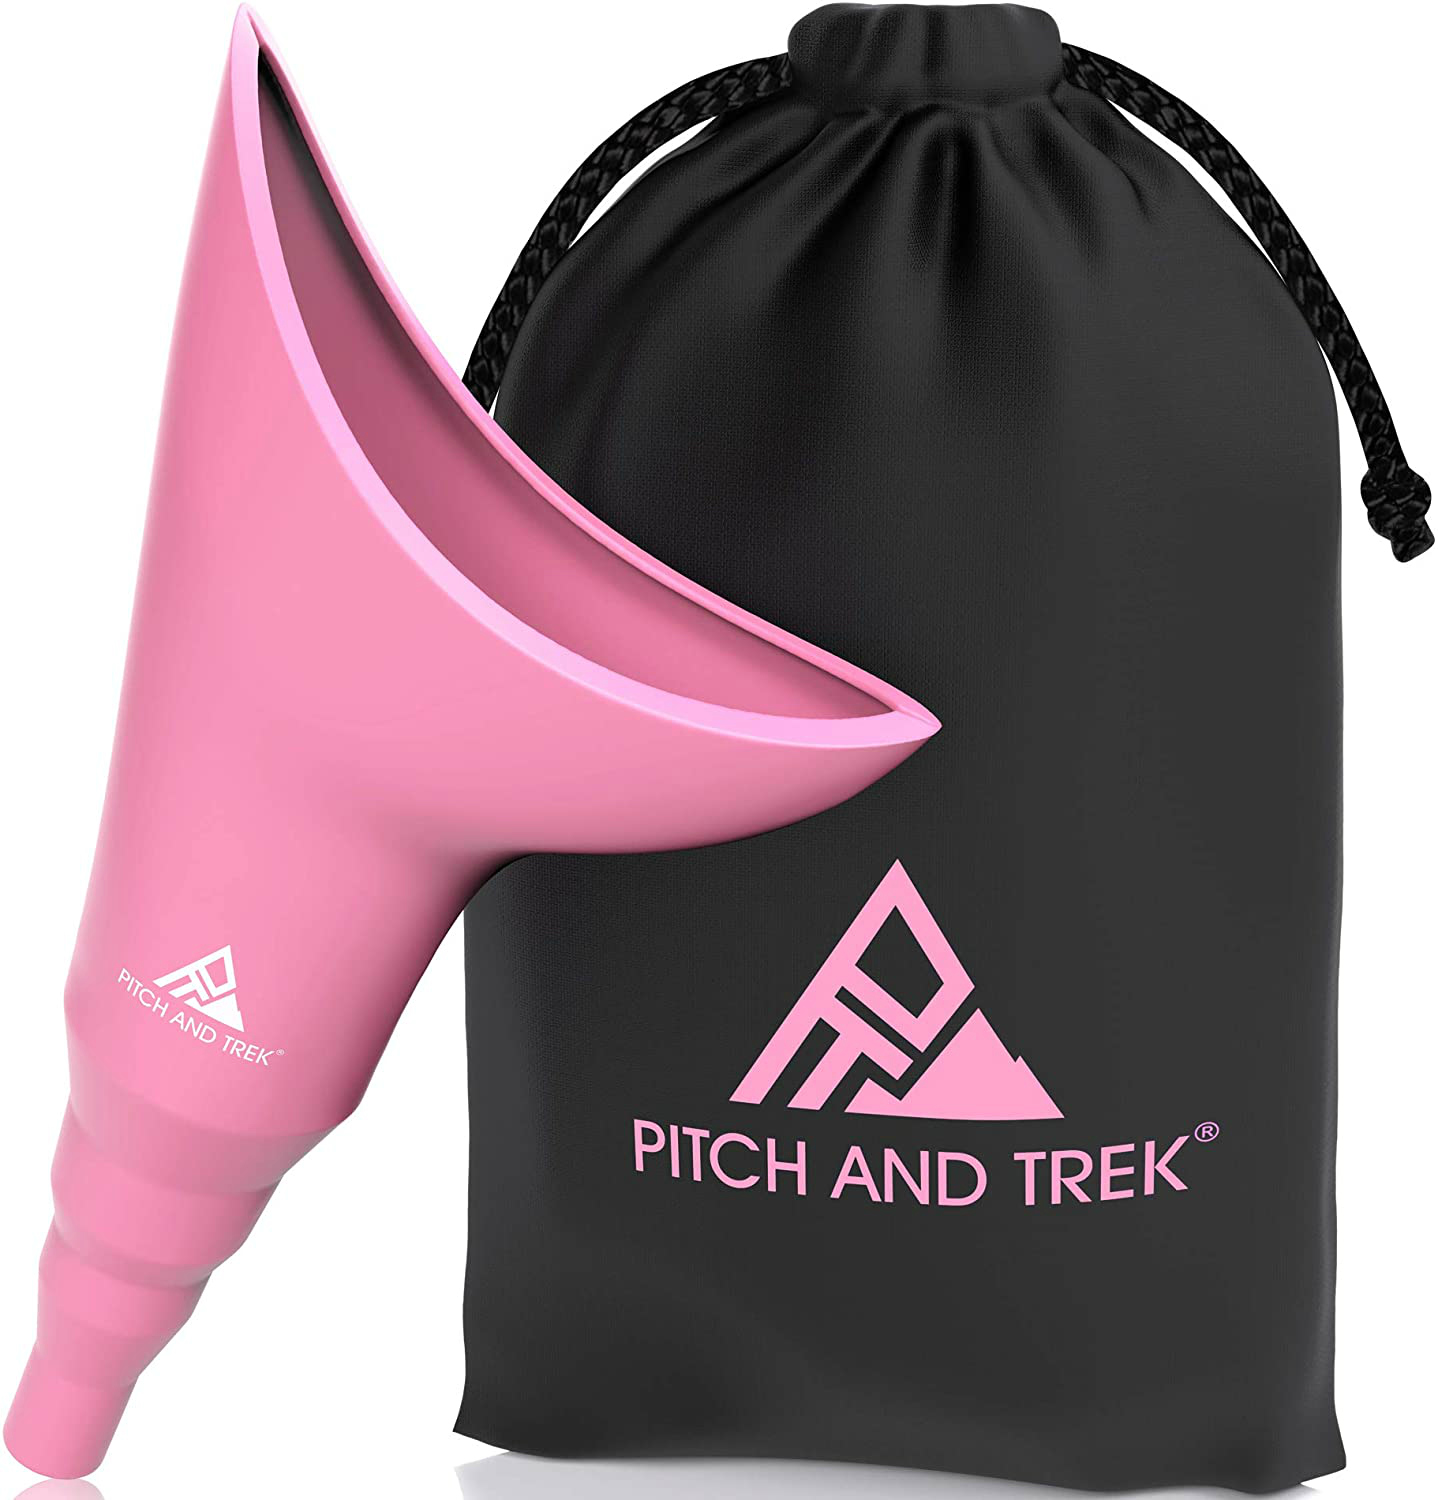 Portable Urinal Allows Women to Pee Standing Up,Female Urinal Reusable Silicone Female Urinal is Perfect Companion for Travel and Outdoor with 2 Extension Tube-Pink Geeclo Female Urination Device 